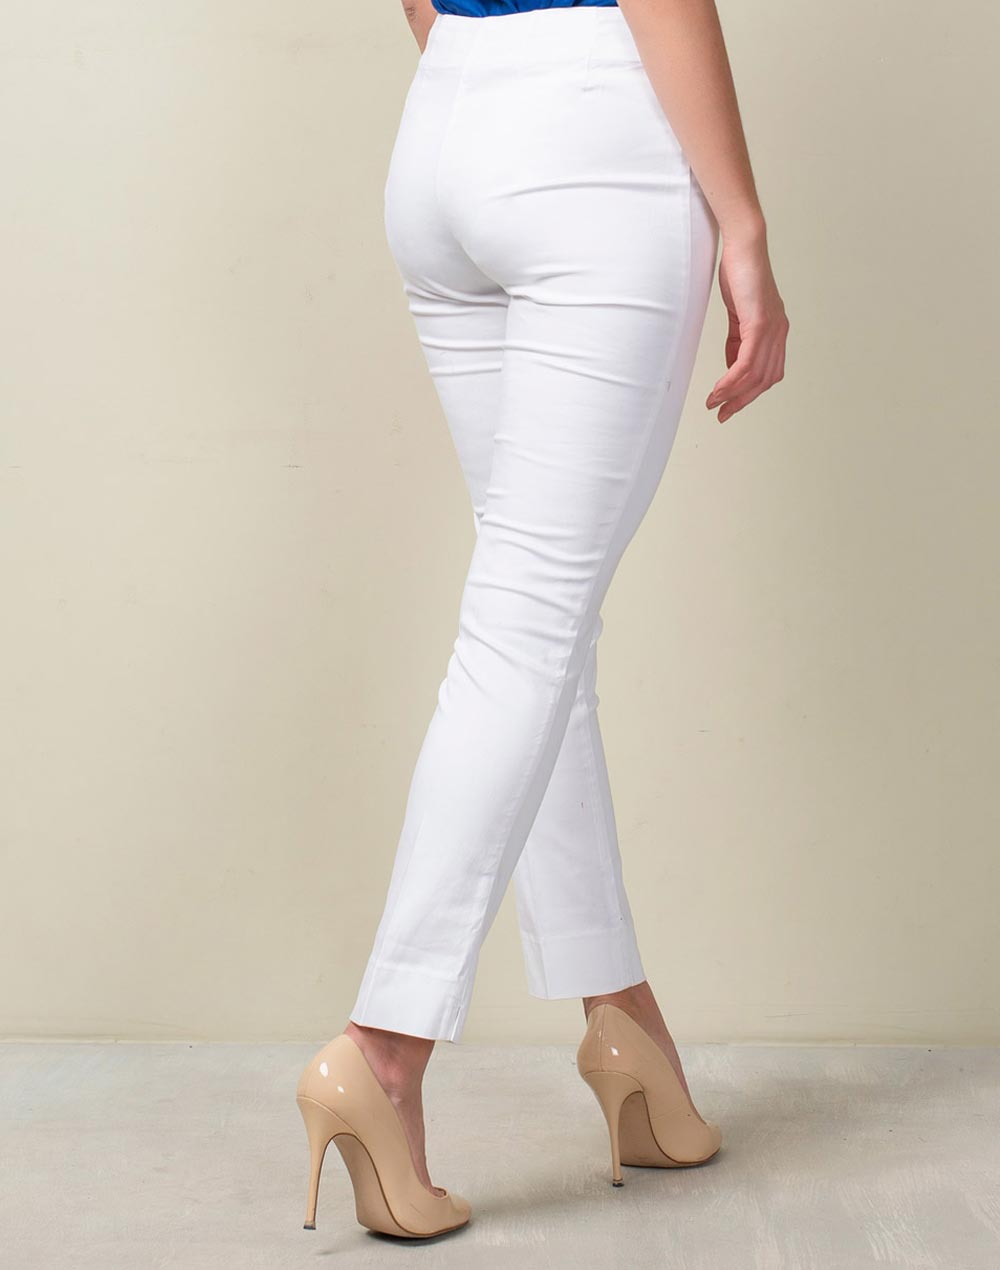 COMBRAIDED Slim Fit Men White Trousers - Buy COMBRAIDED Slim Fit Men White  Trousers Online at Best Prices in India | Flipkart.com